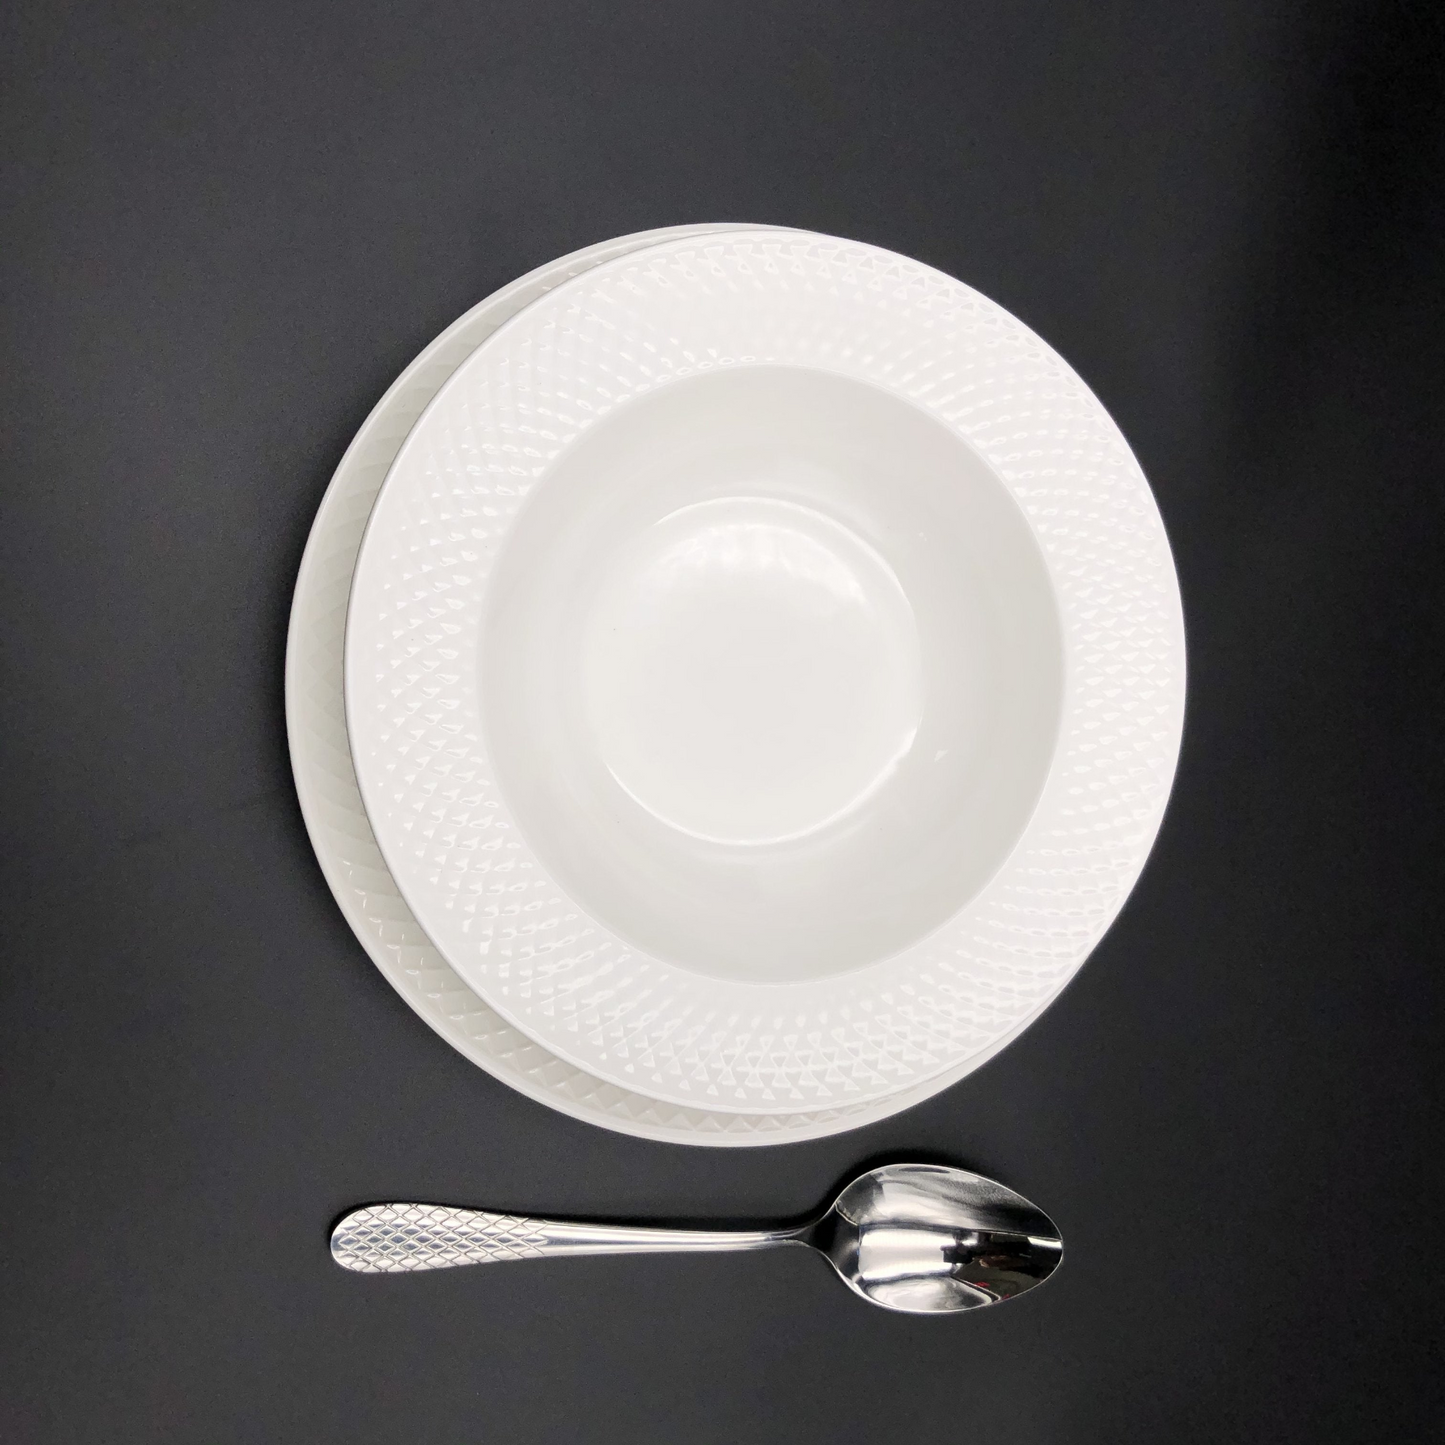 Wilmax Fine Julia Porcelain Deep Plate Dinnerware Set For 6 Including 10" Charger Plate WL-555027